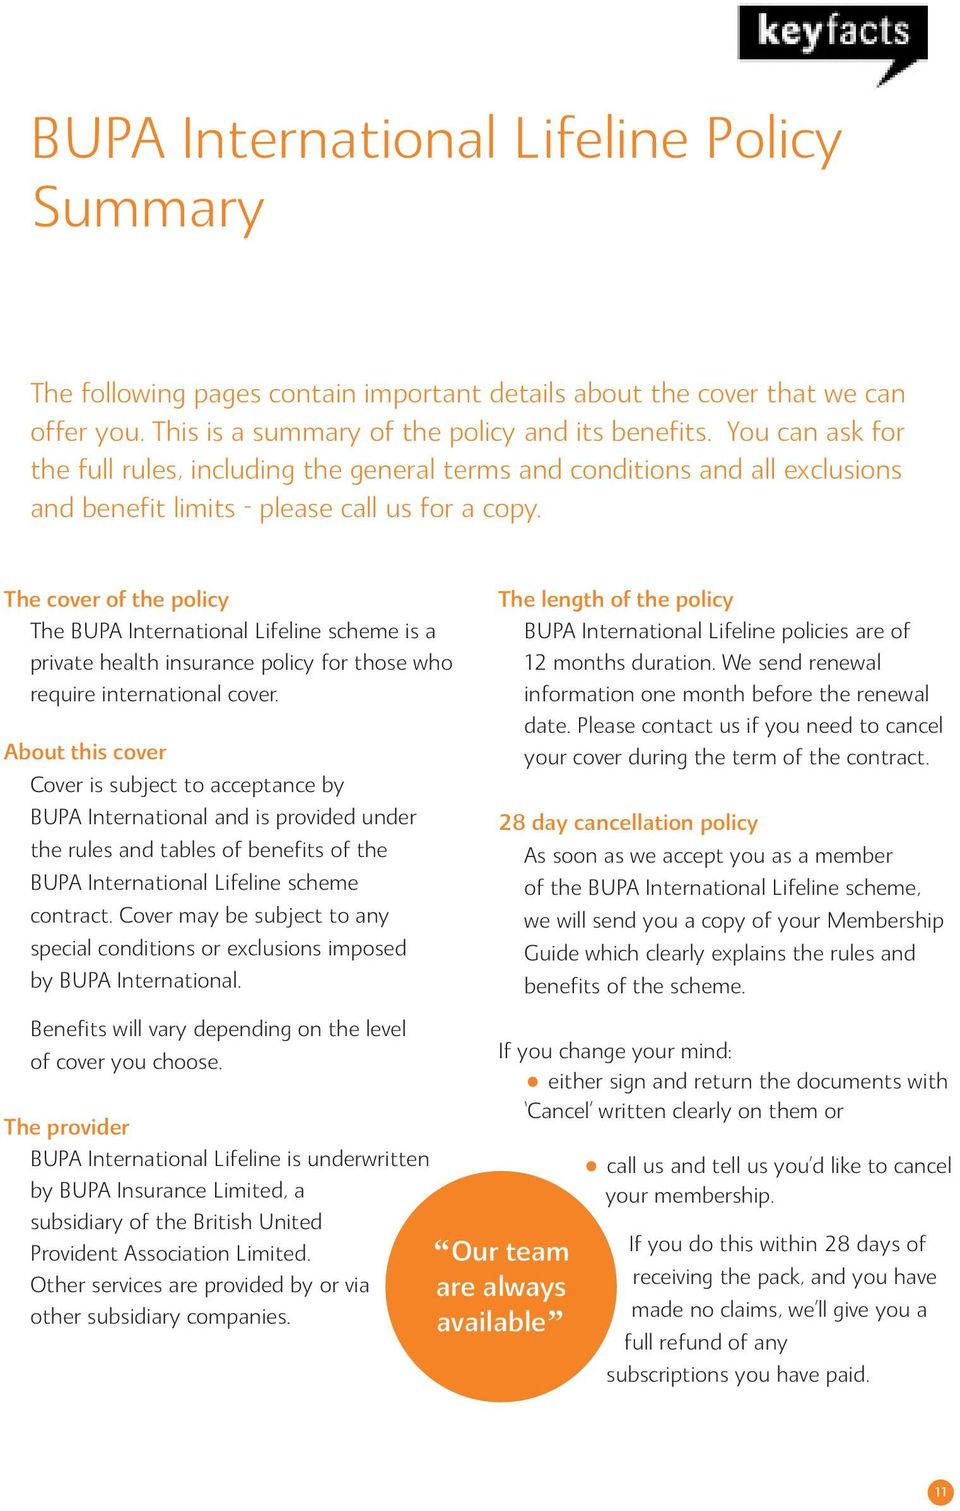 The cover of the policy The BUPA International Lifeline scheme is a private health insurance policy for those who require international cover.